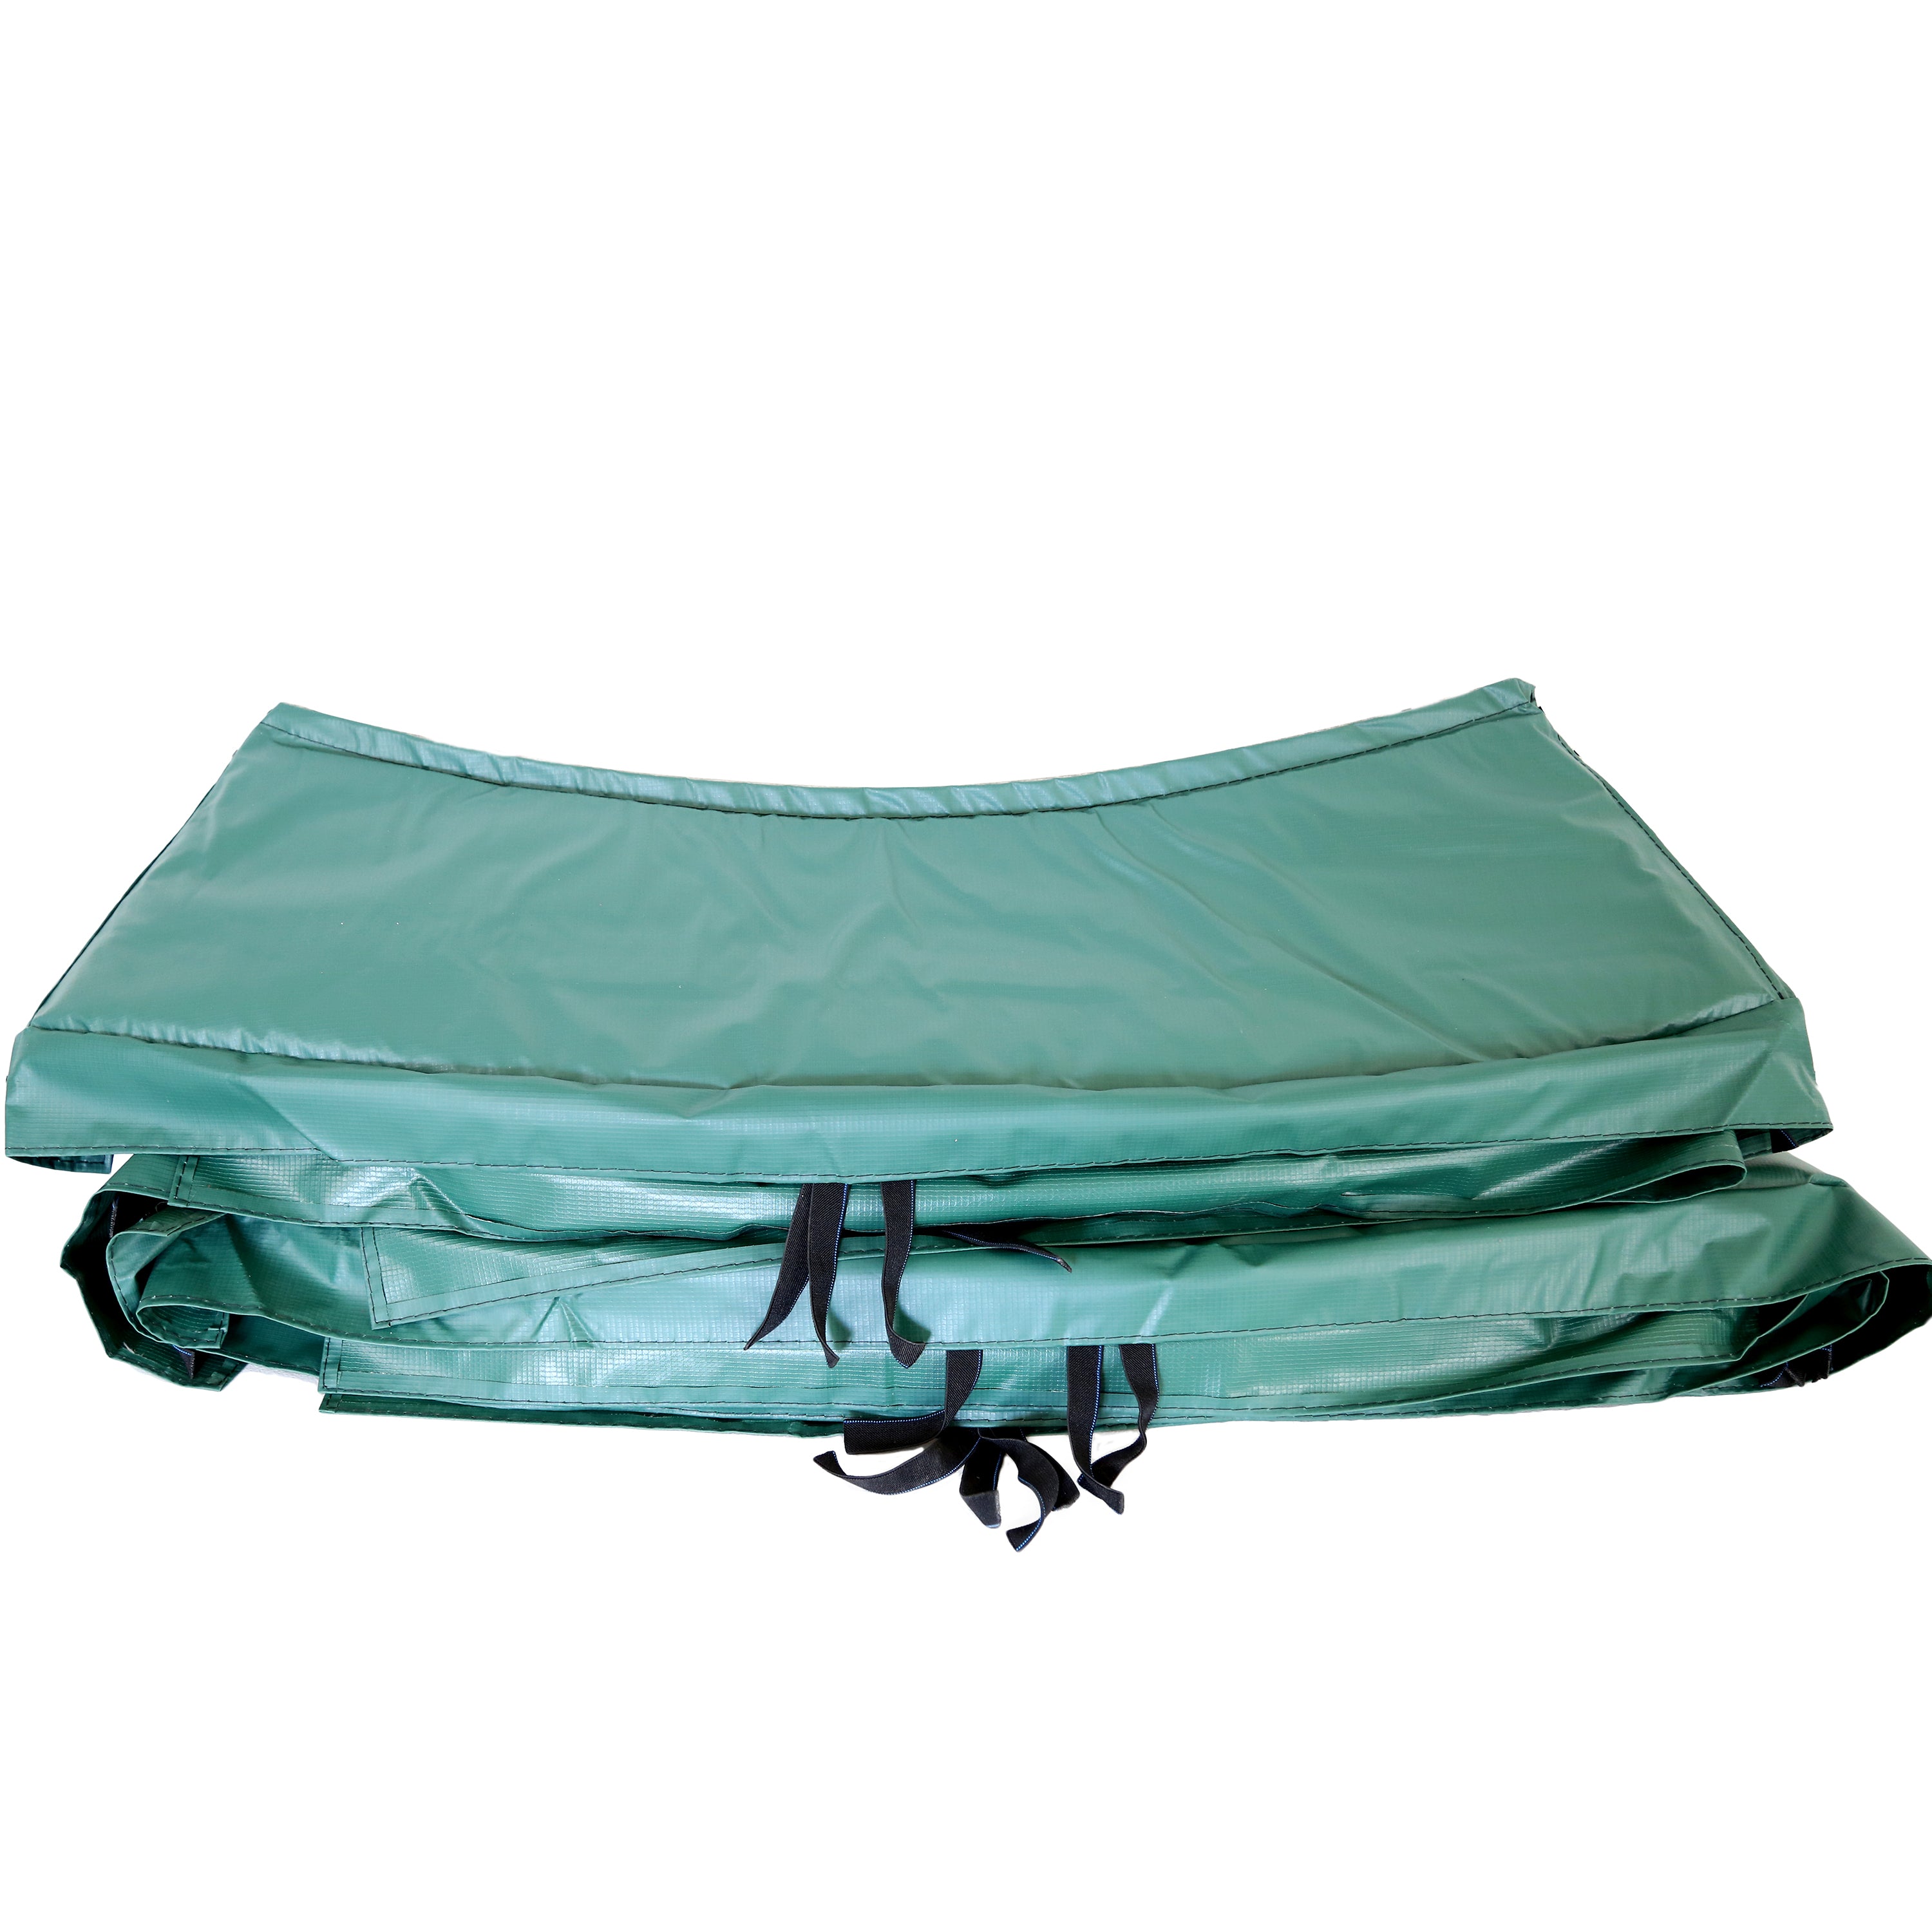 Trampoline spring pad is made out of thick, UV-resistant PVC material. 